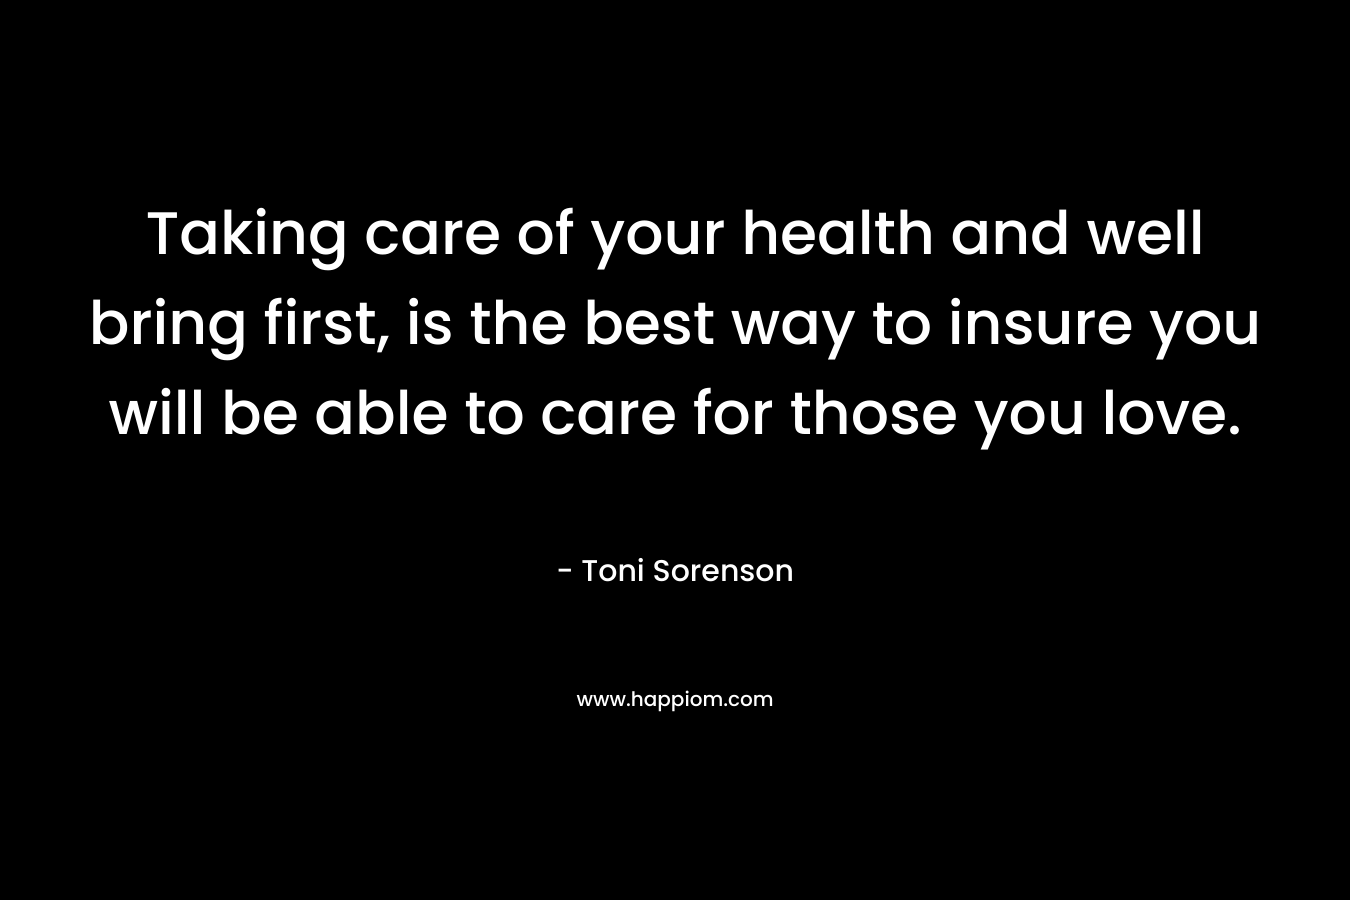 Taking care of your health and well bring first, is the best way to insure you will be able to care for those you love.